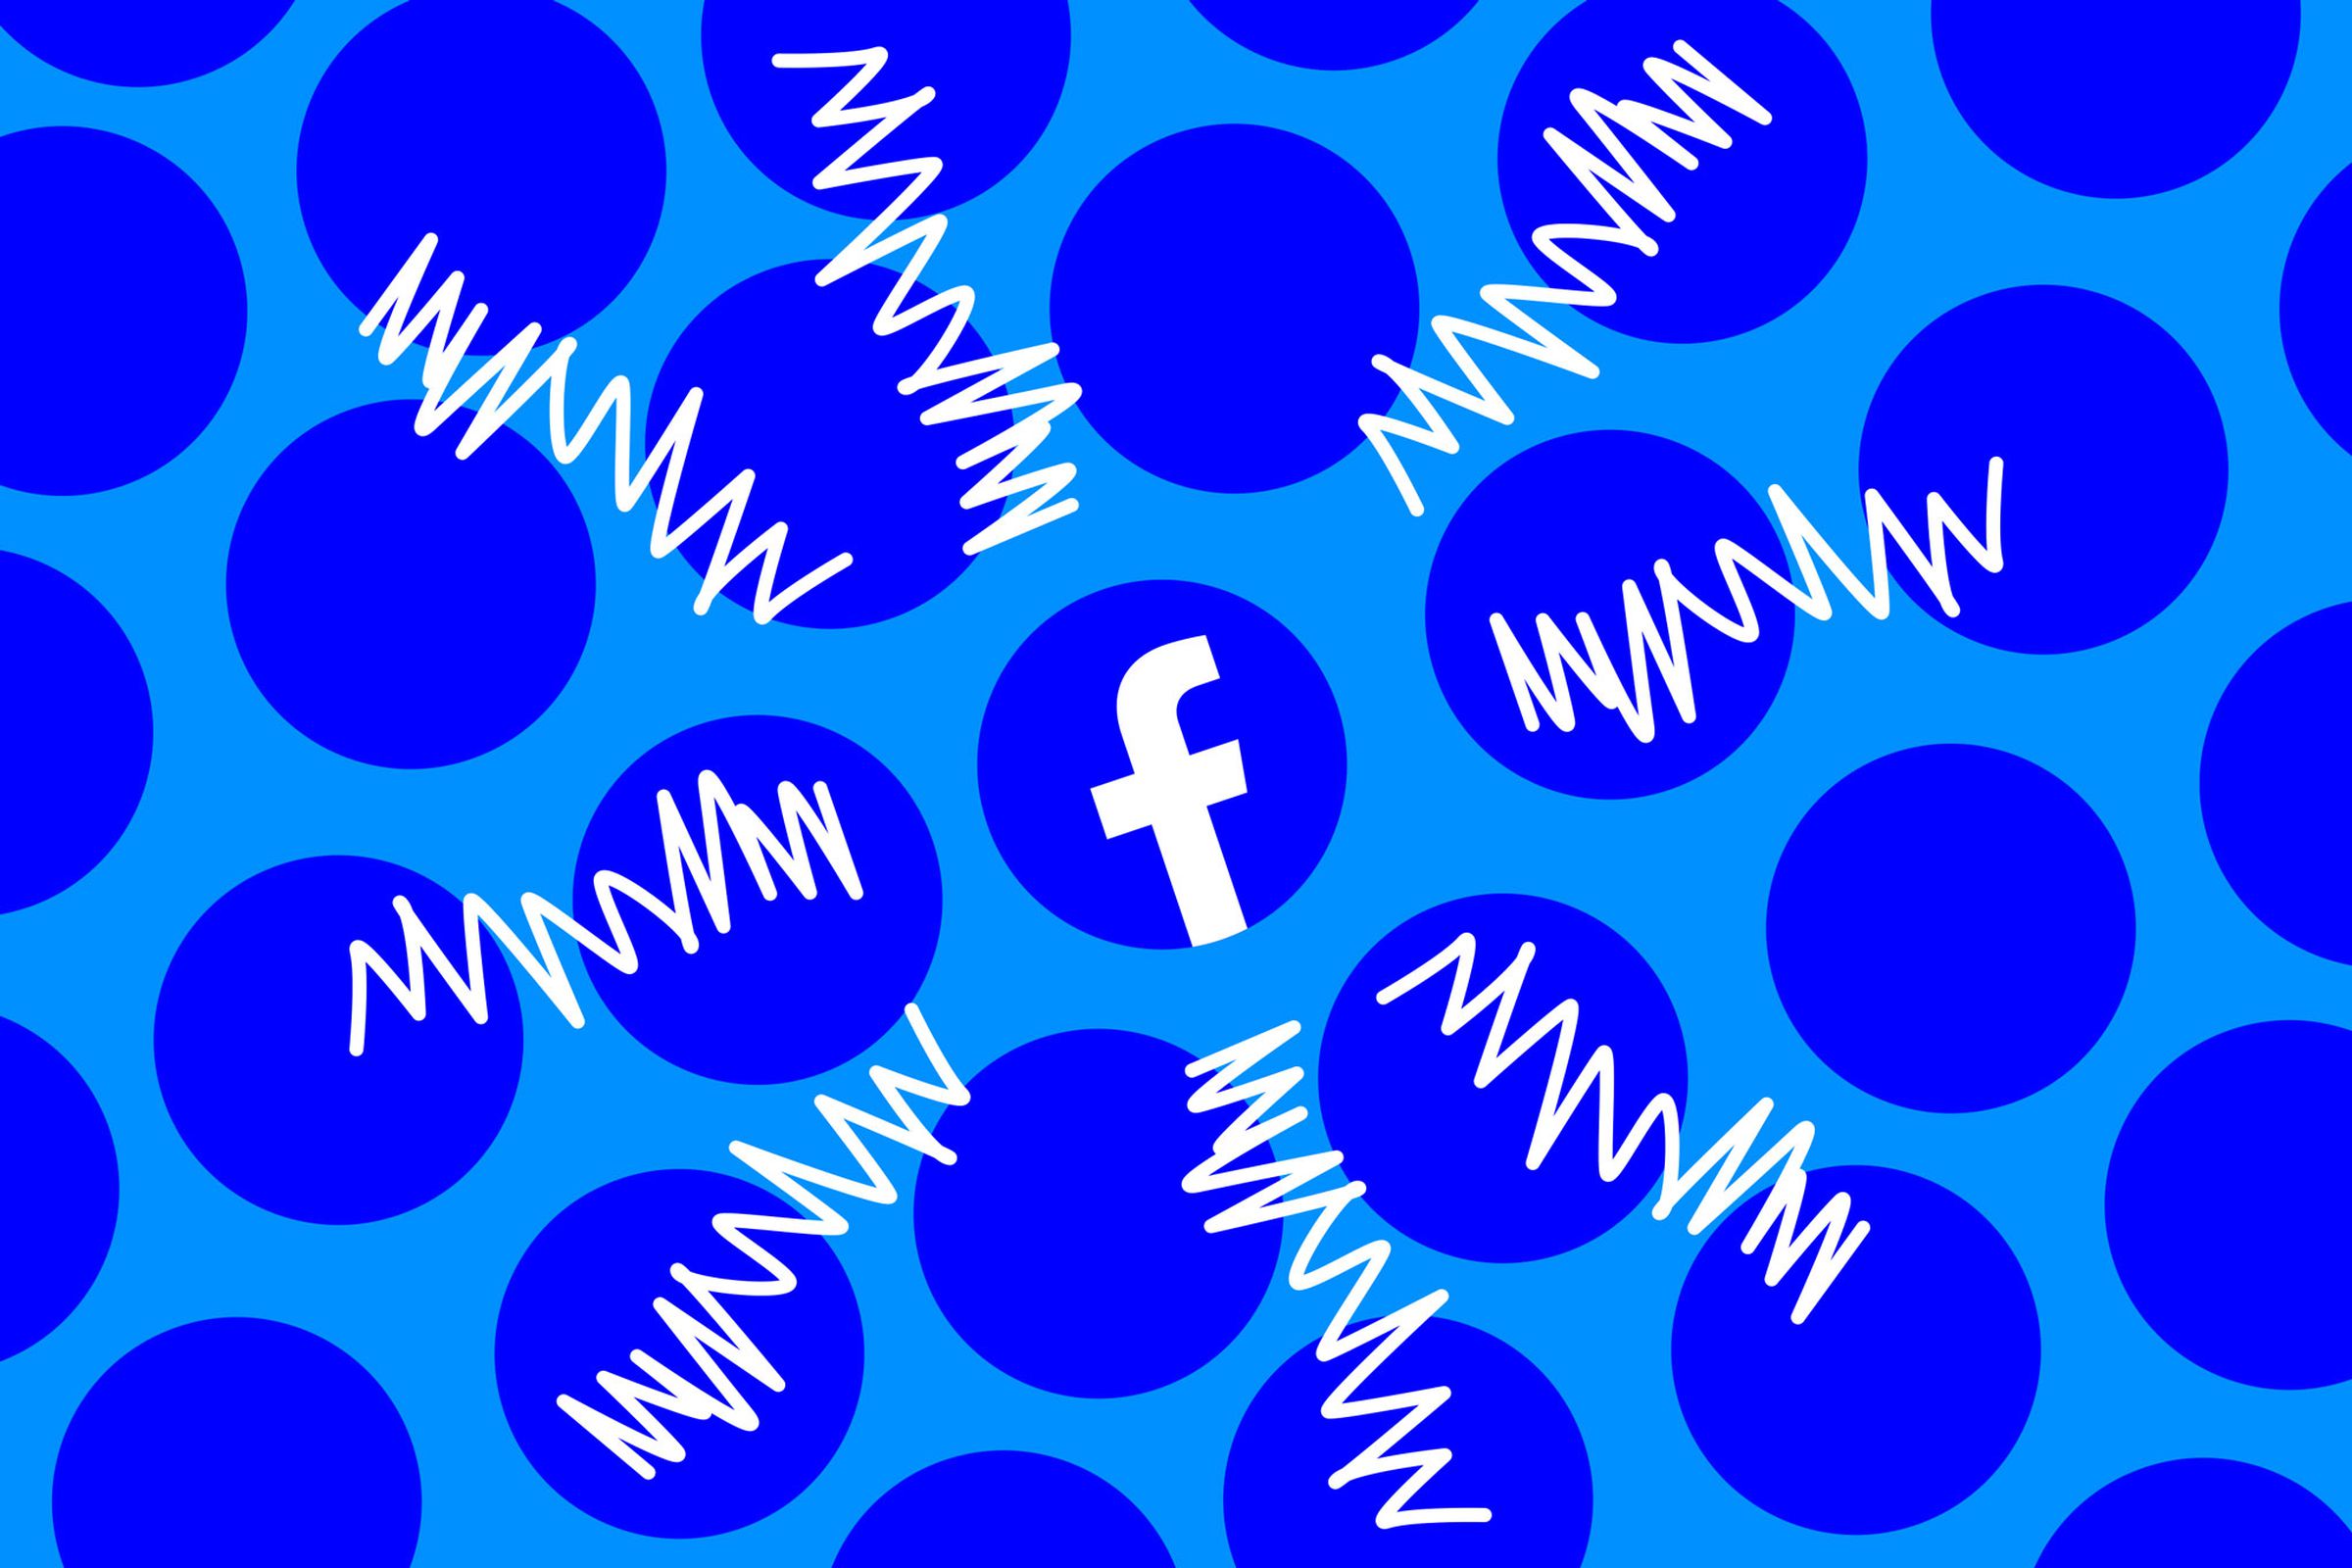 A Facebook logo surrounded by blue dots and white squiggles.